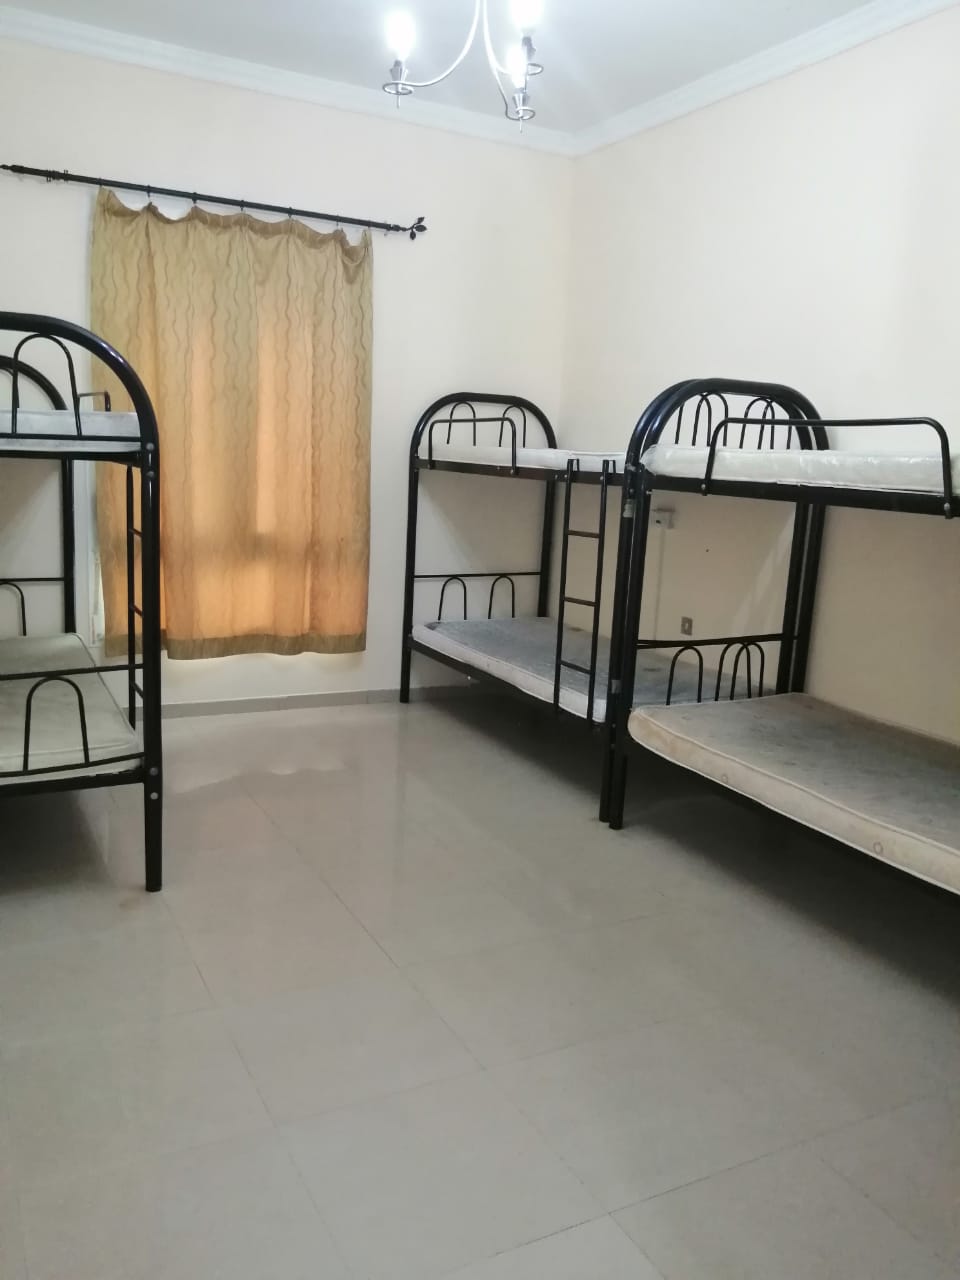 EXECUTIVE BED SPACES AVAILABLE (For Male & Female)